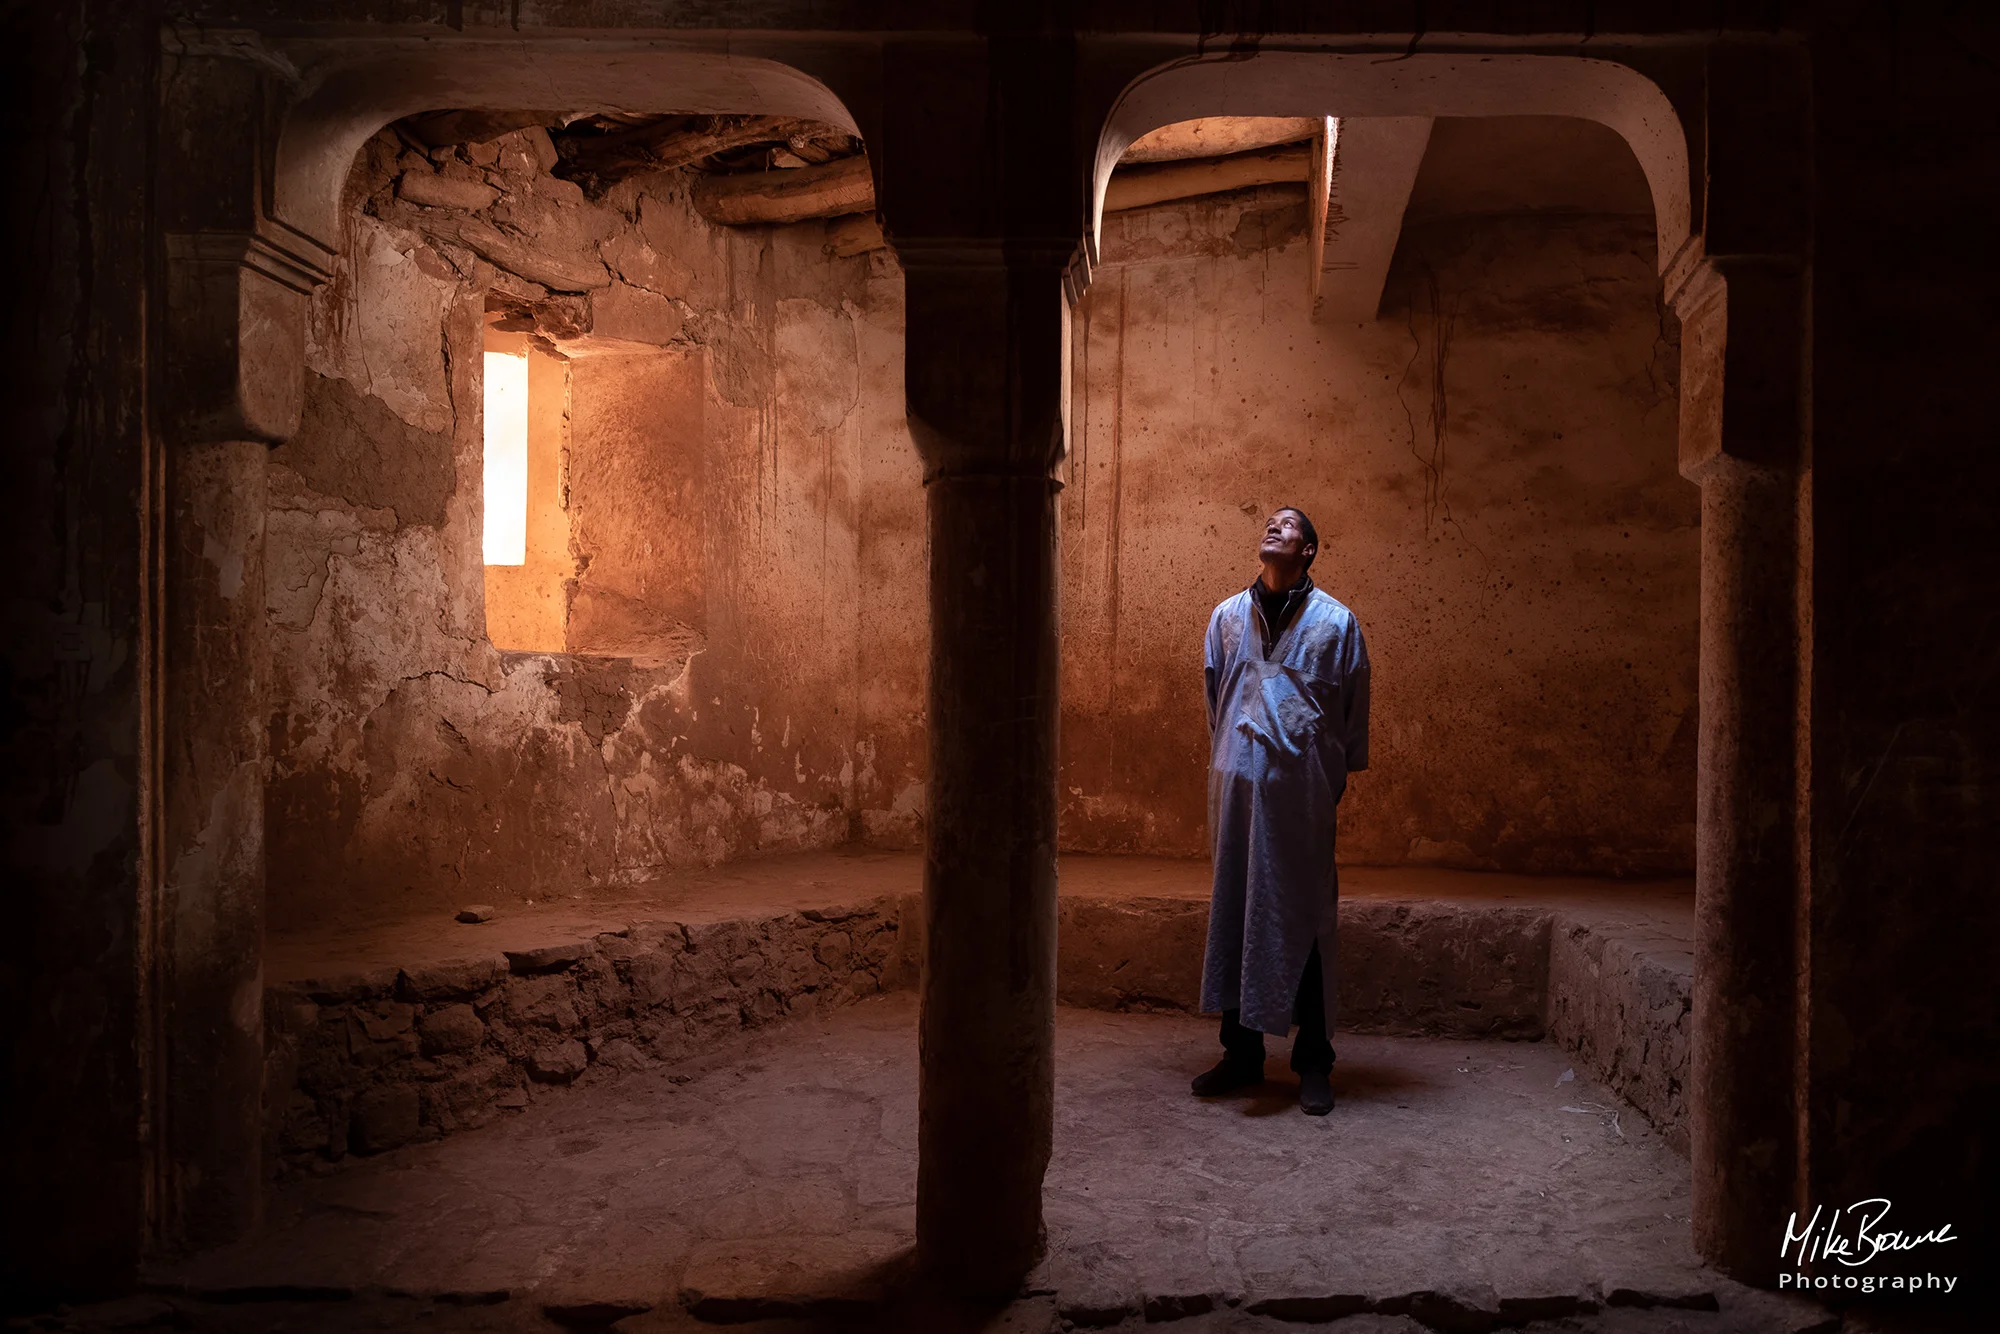 Man standing between pillars and looking up at overhead window in a dimly lit Kasbah in Morocco